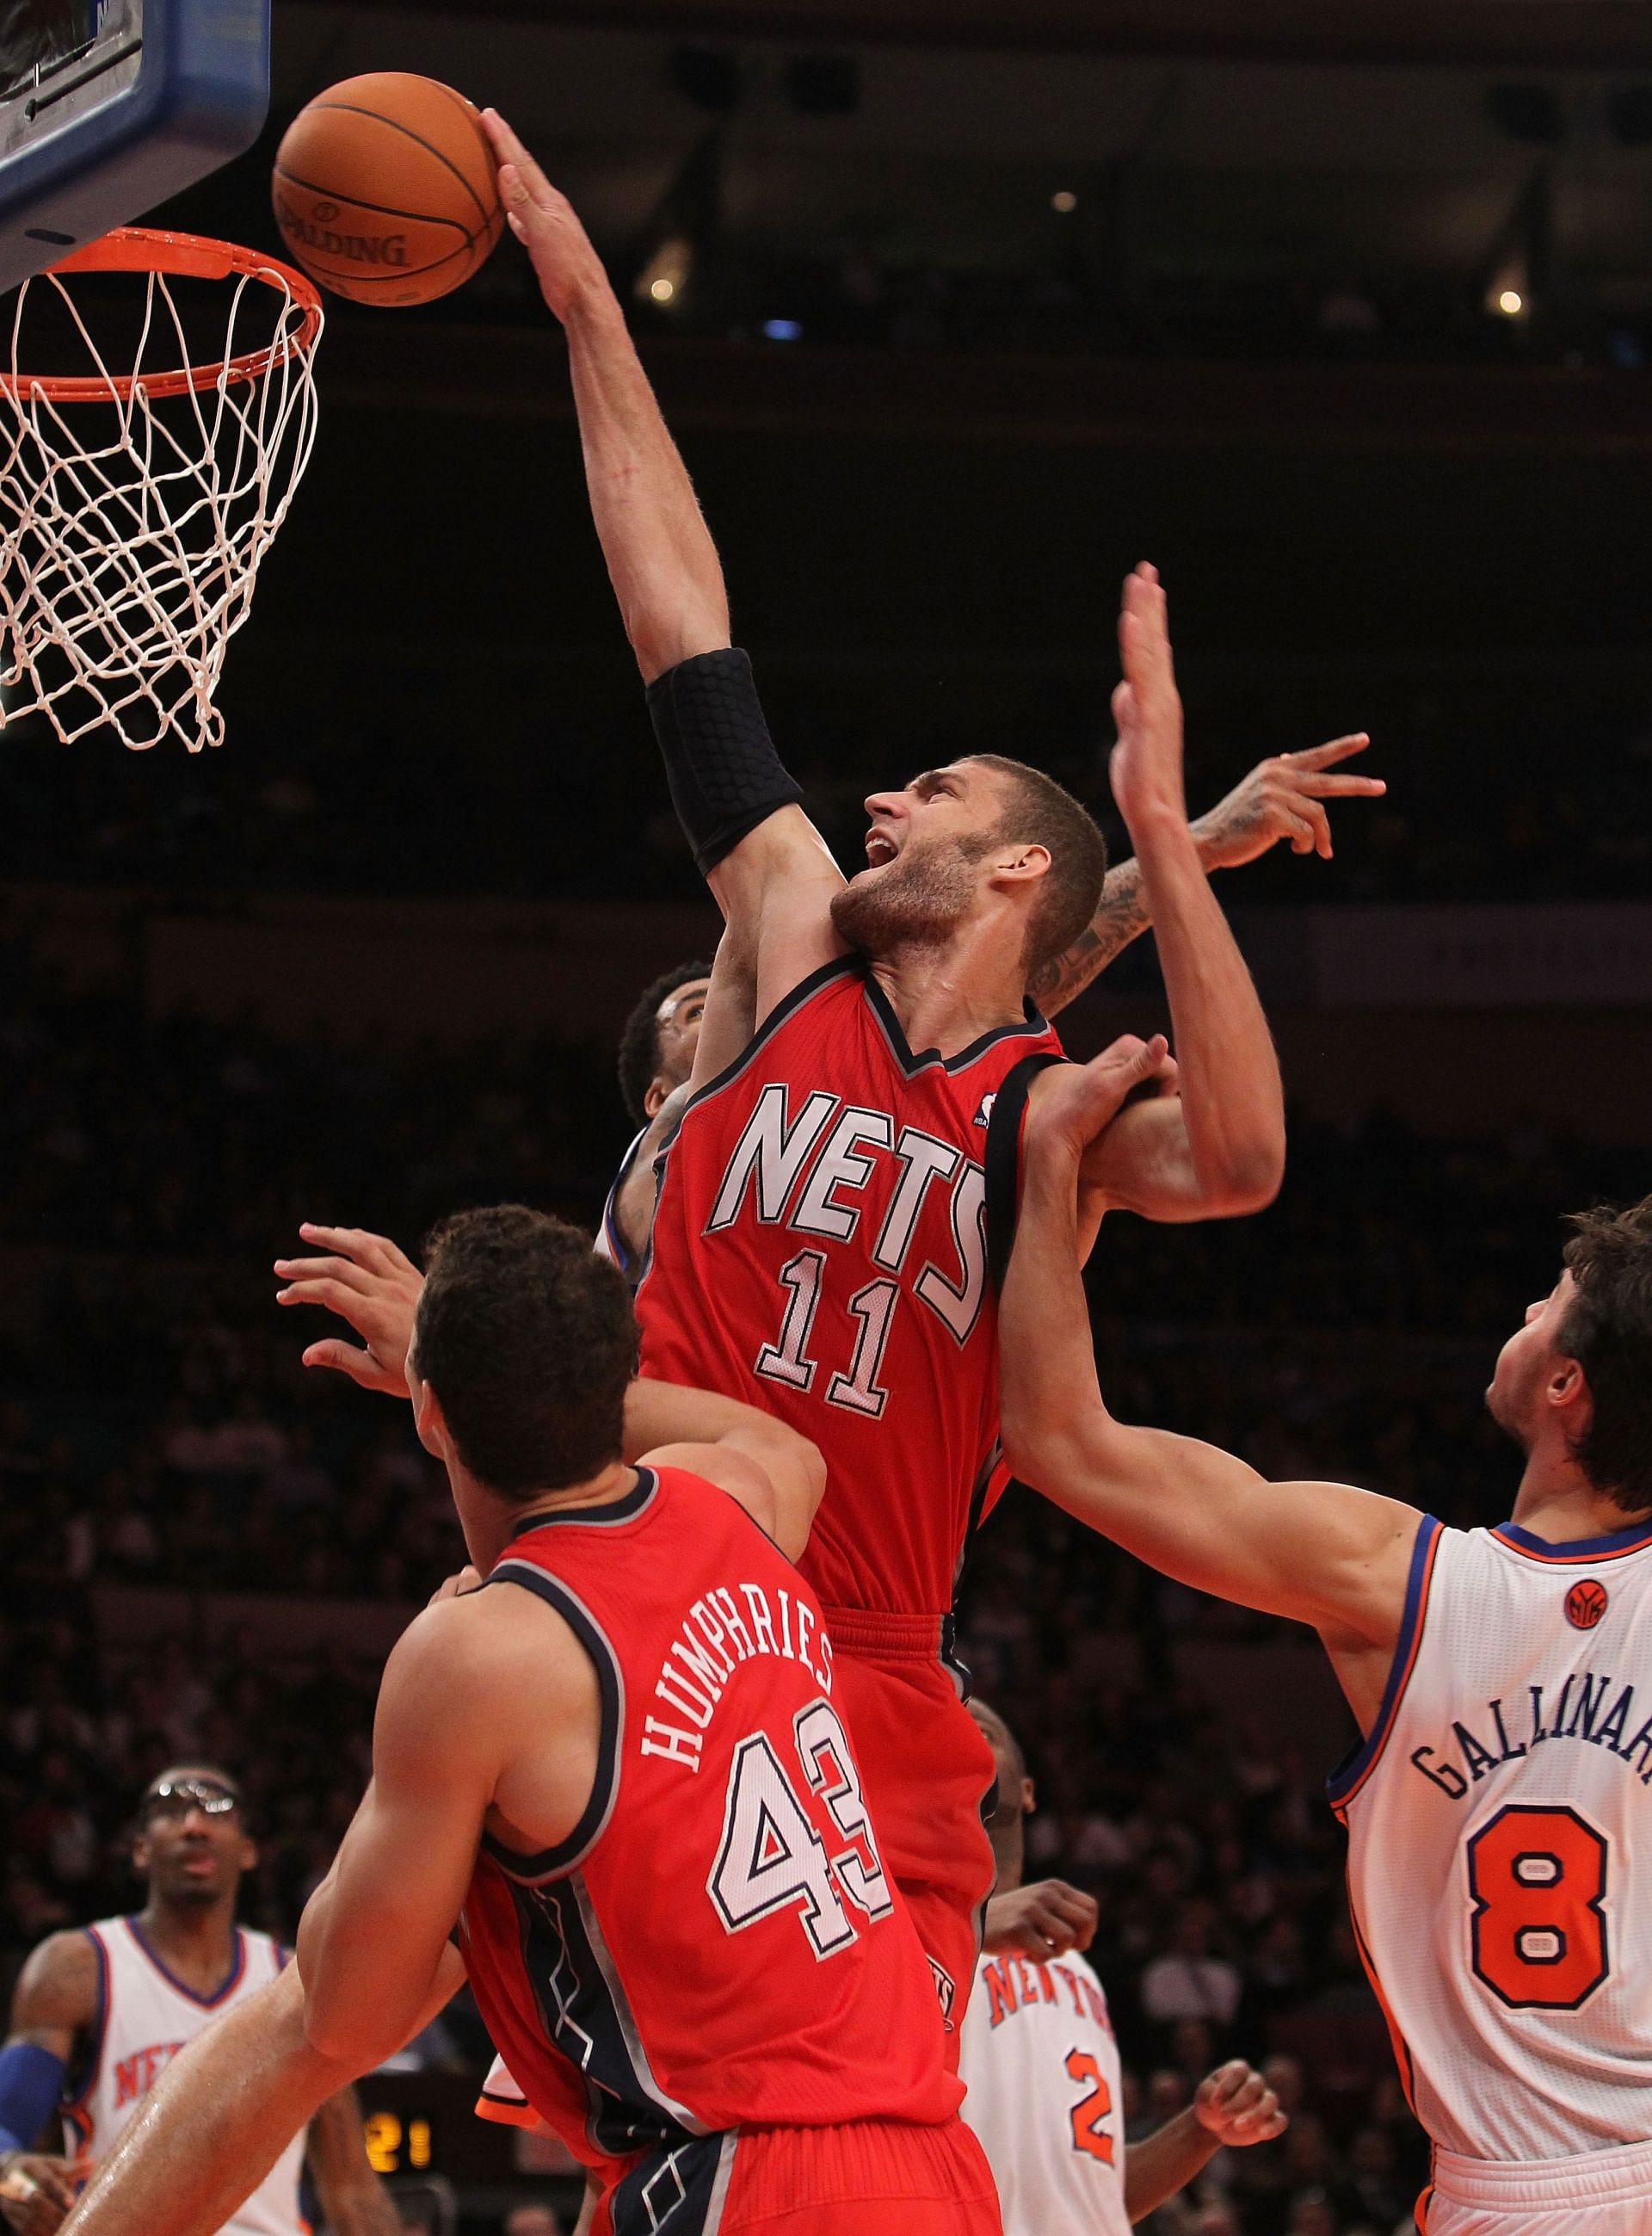 Brook Lopez averaged 18.8 points, 8.6 rebounds and 1.7 blocks per game in the 2009-2010 season.